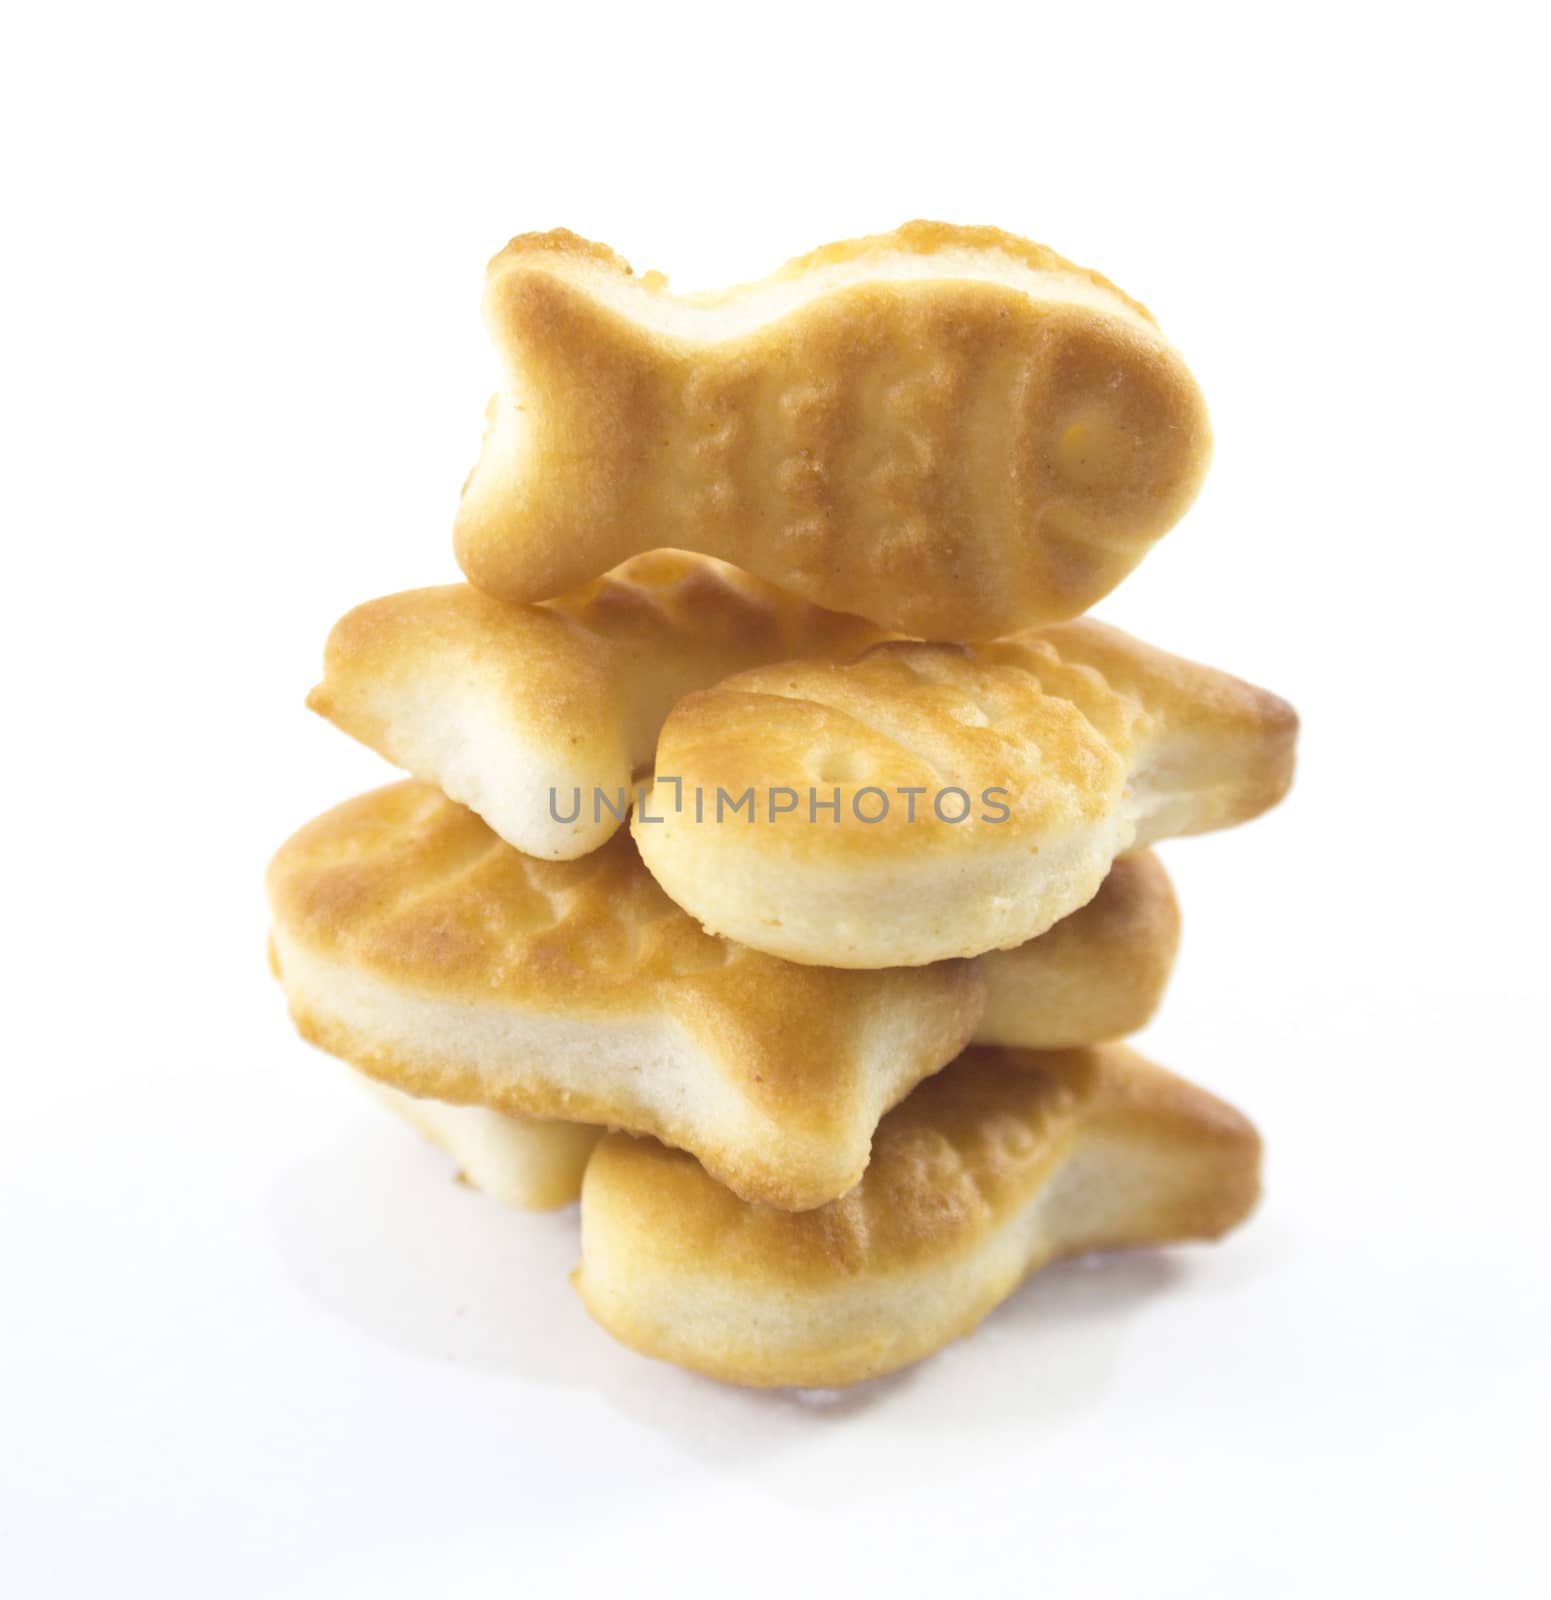 salted cookies stack by designsstock